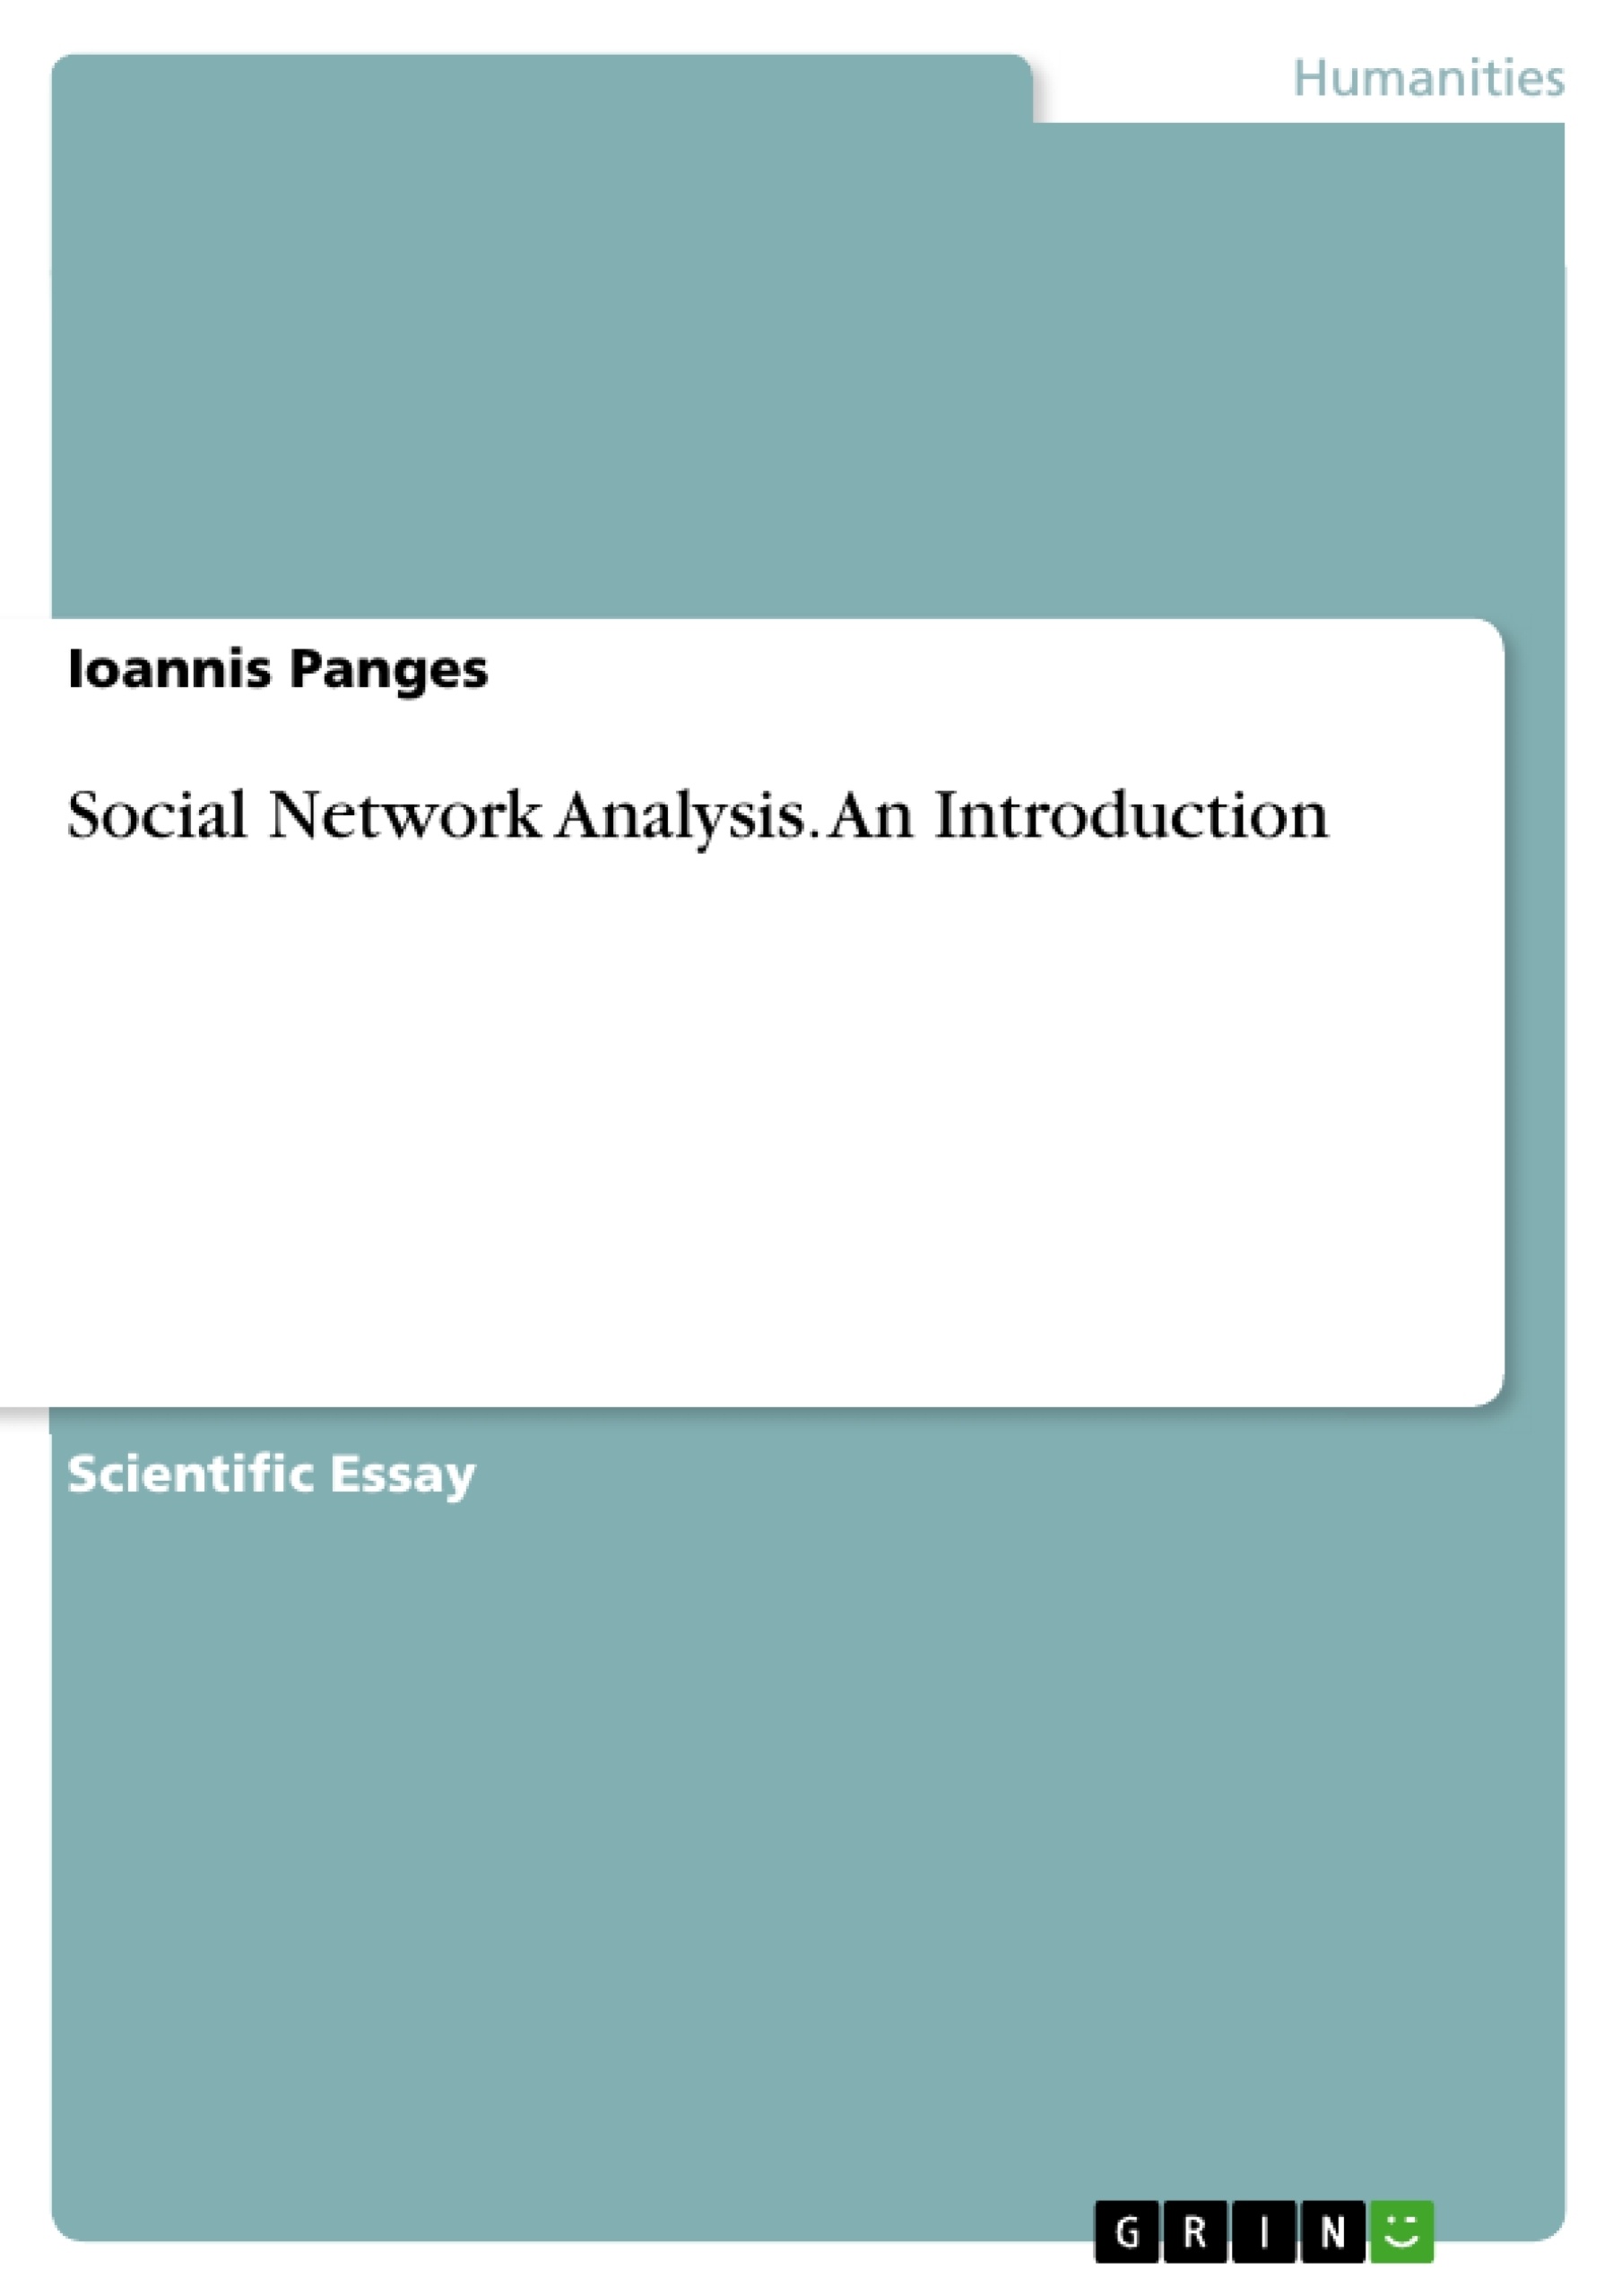 Title: Social Network Analysis. An Introduction